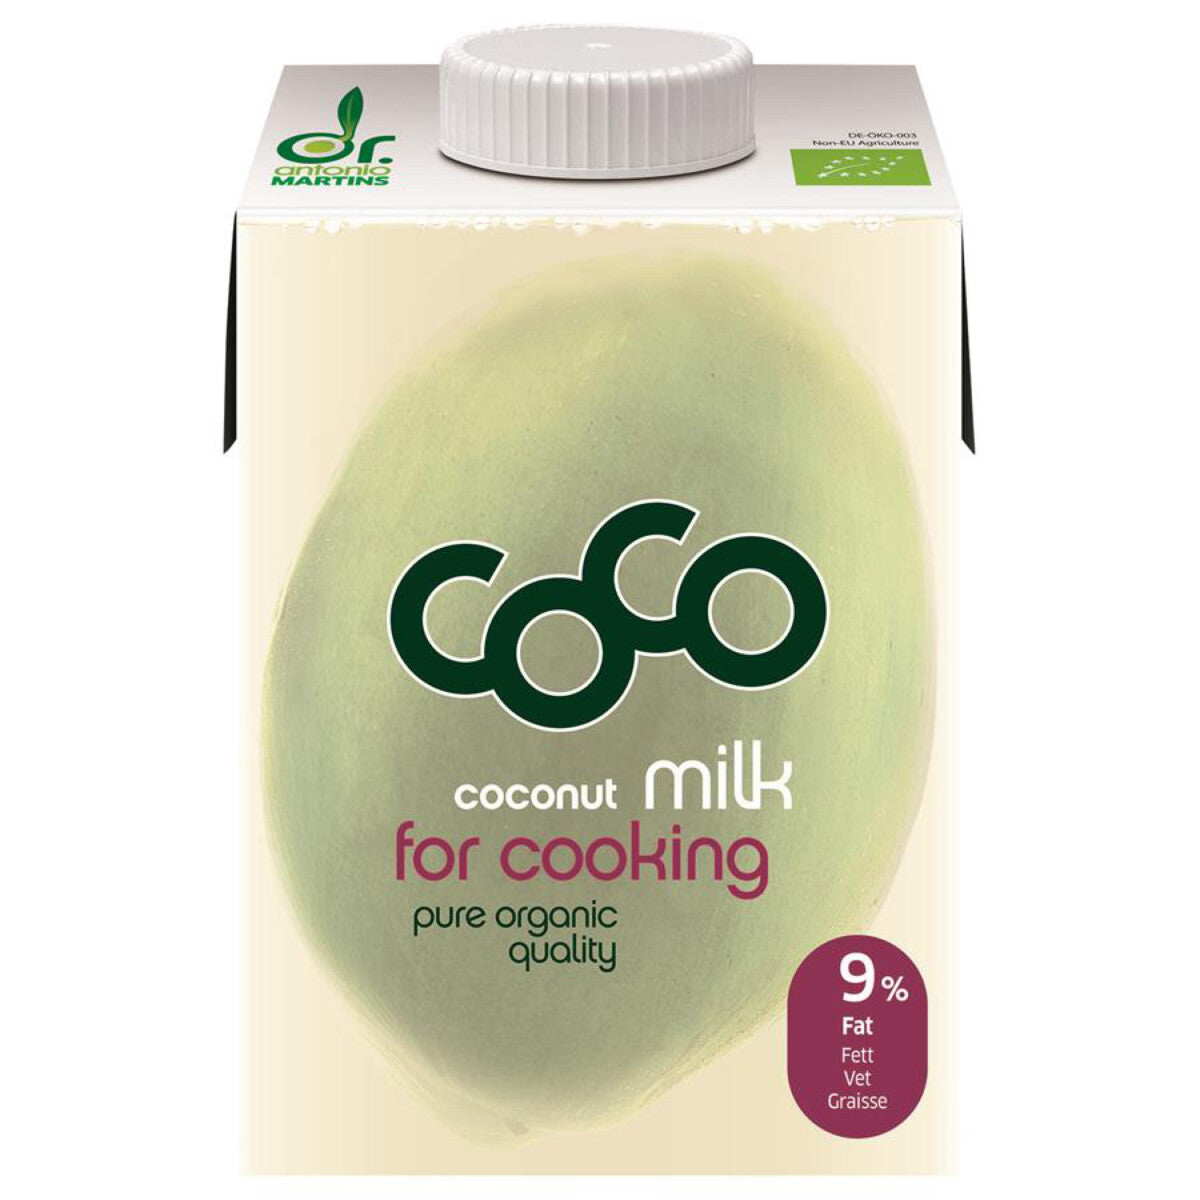 DR. MARTINS Coco Milk for Cooking - 0,5 l